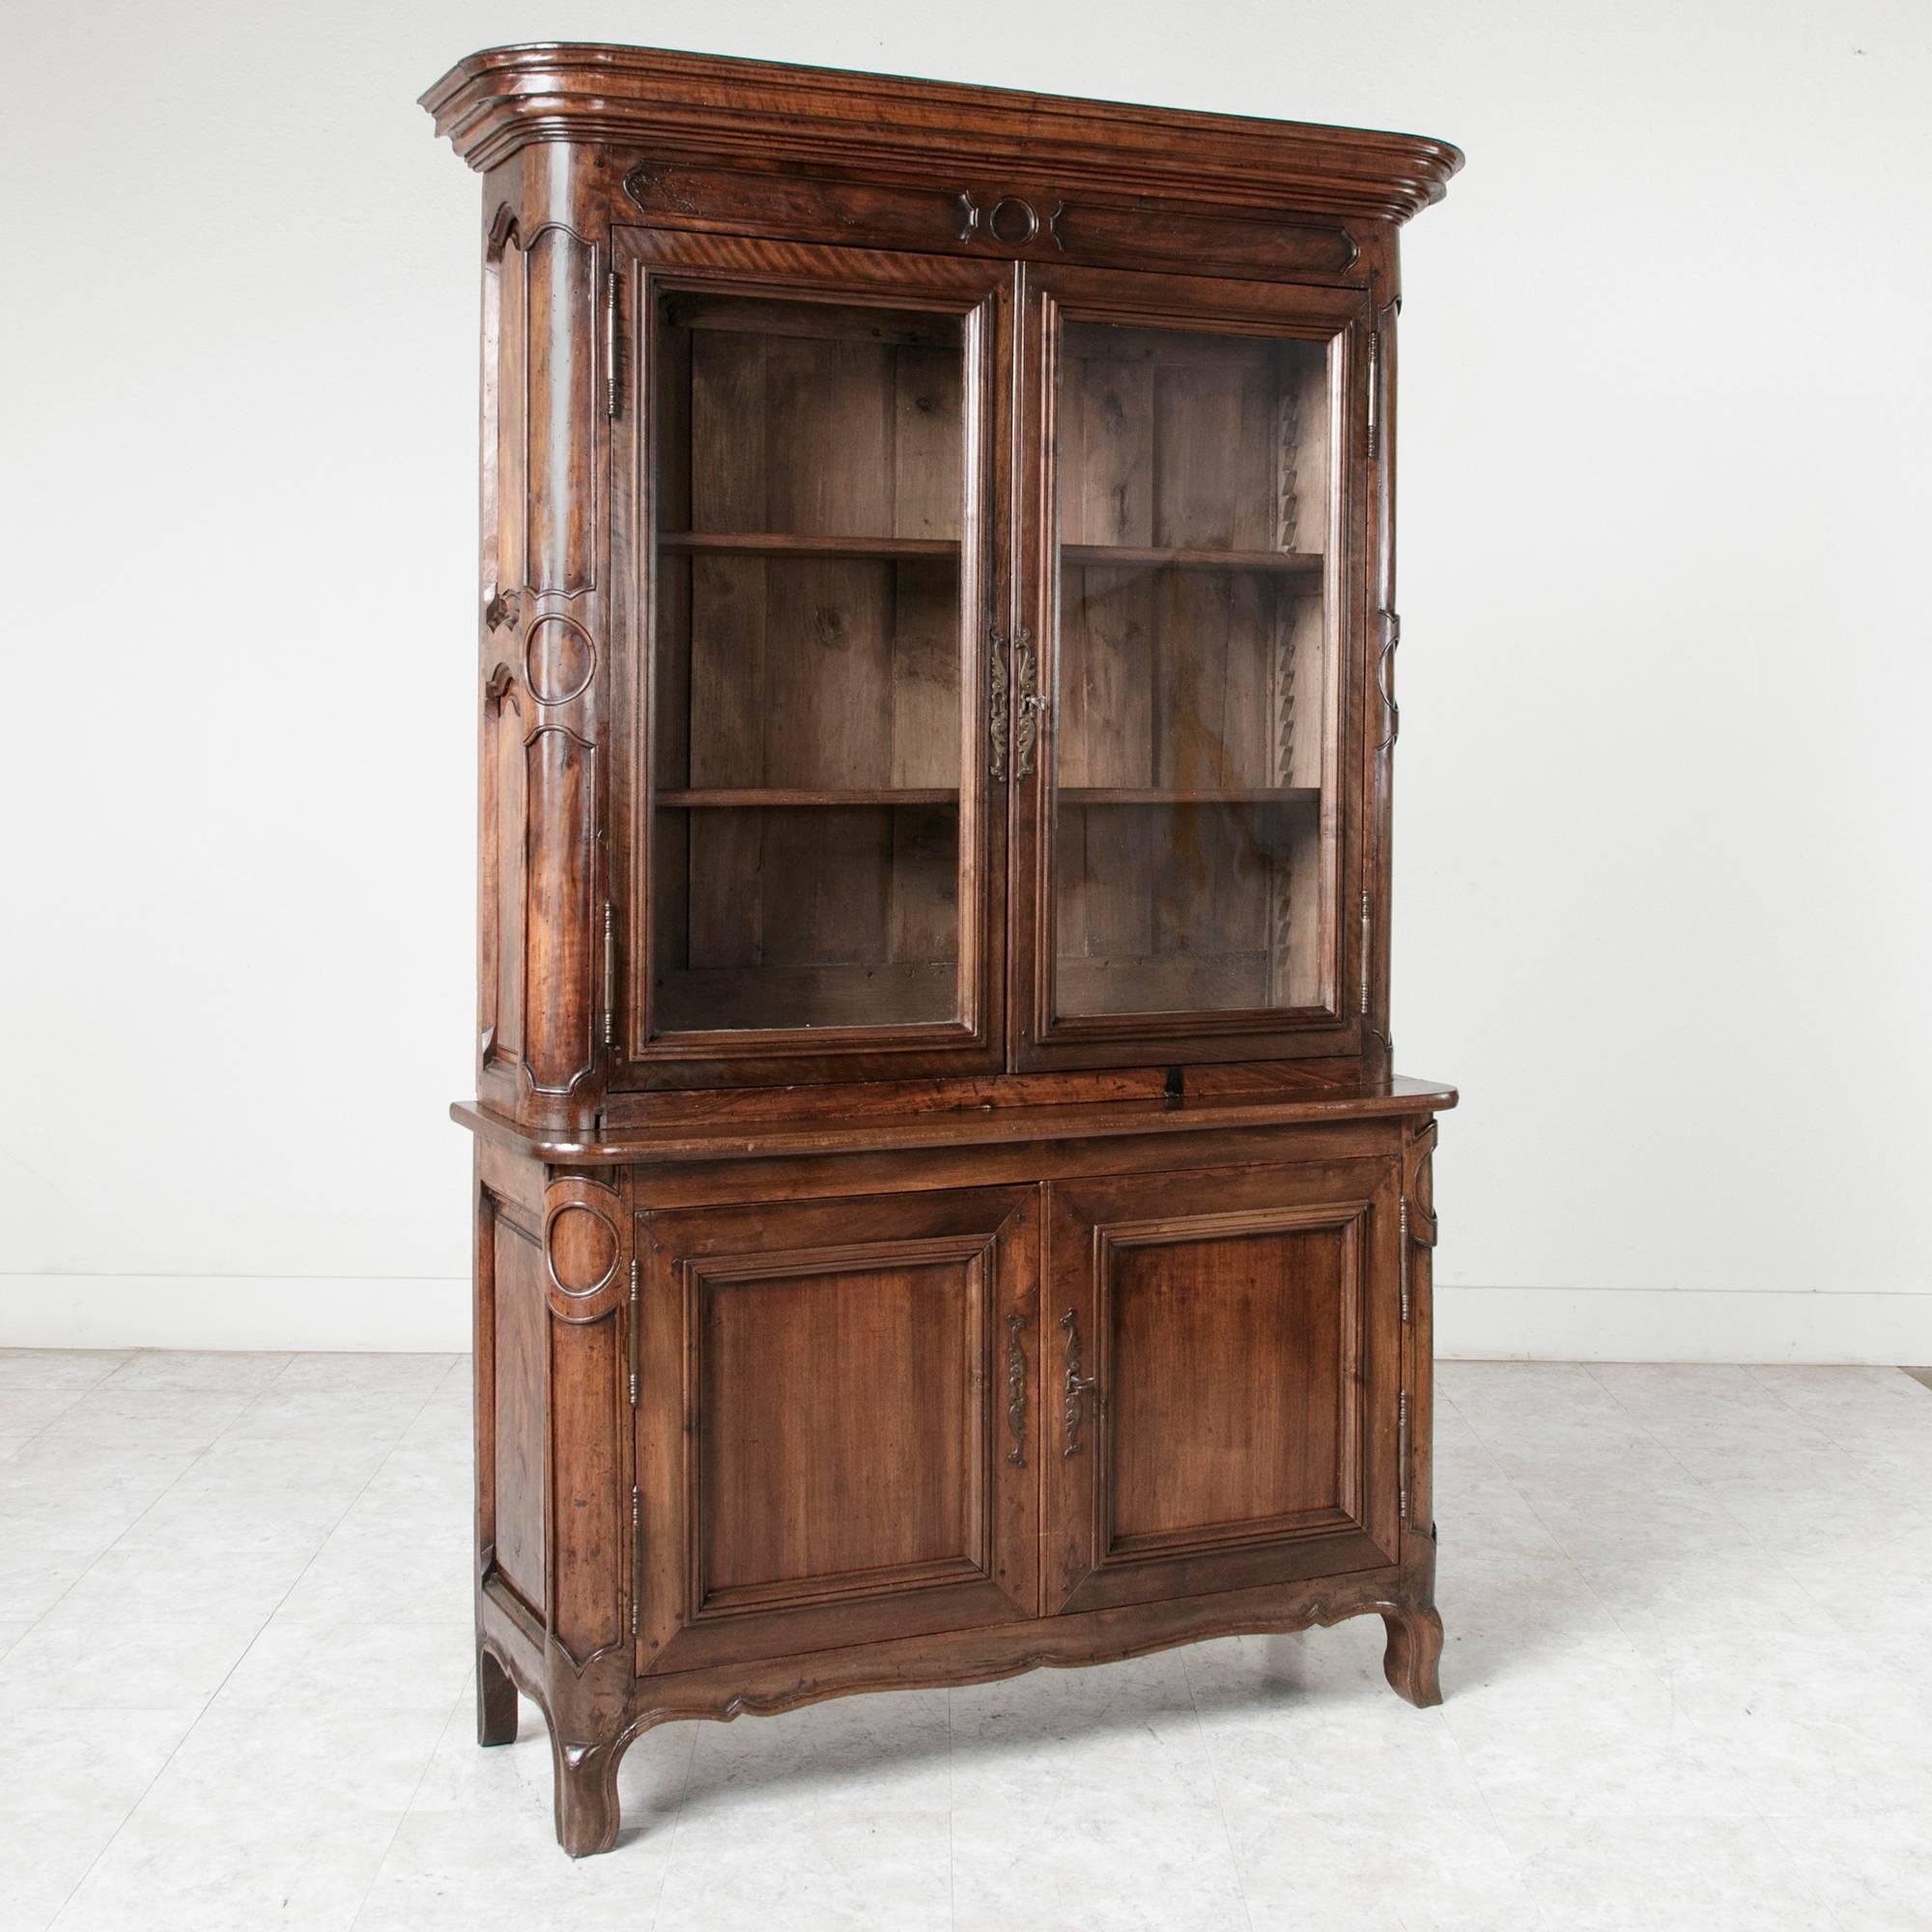 Unusual for its narrow 15-inch depth and exceptional deep relief on its hand-carved solid paneled sides, this 18th century hand pegged walnut bibliothèque, vitrine, or bookcase features handblown glass in the upper doors. Fitted with iron fiche